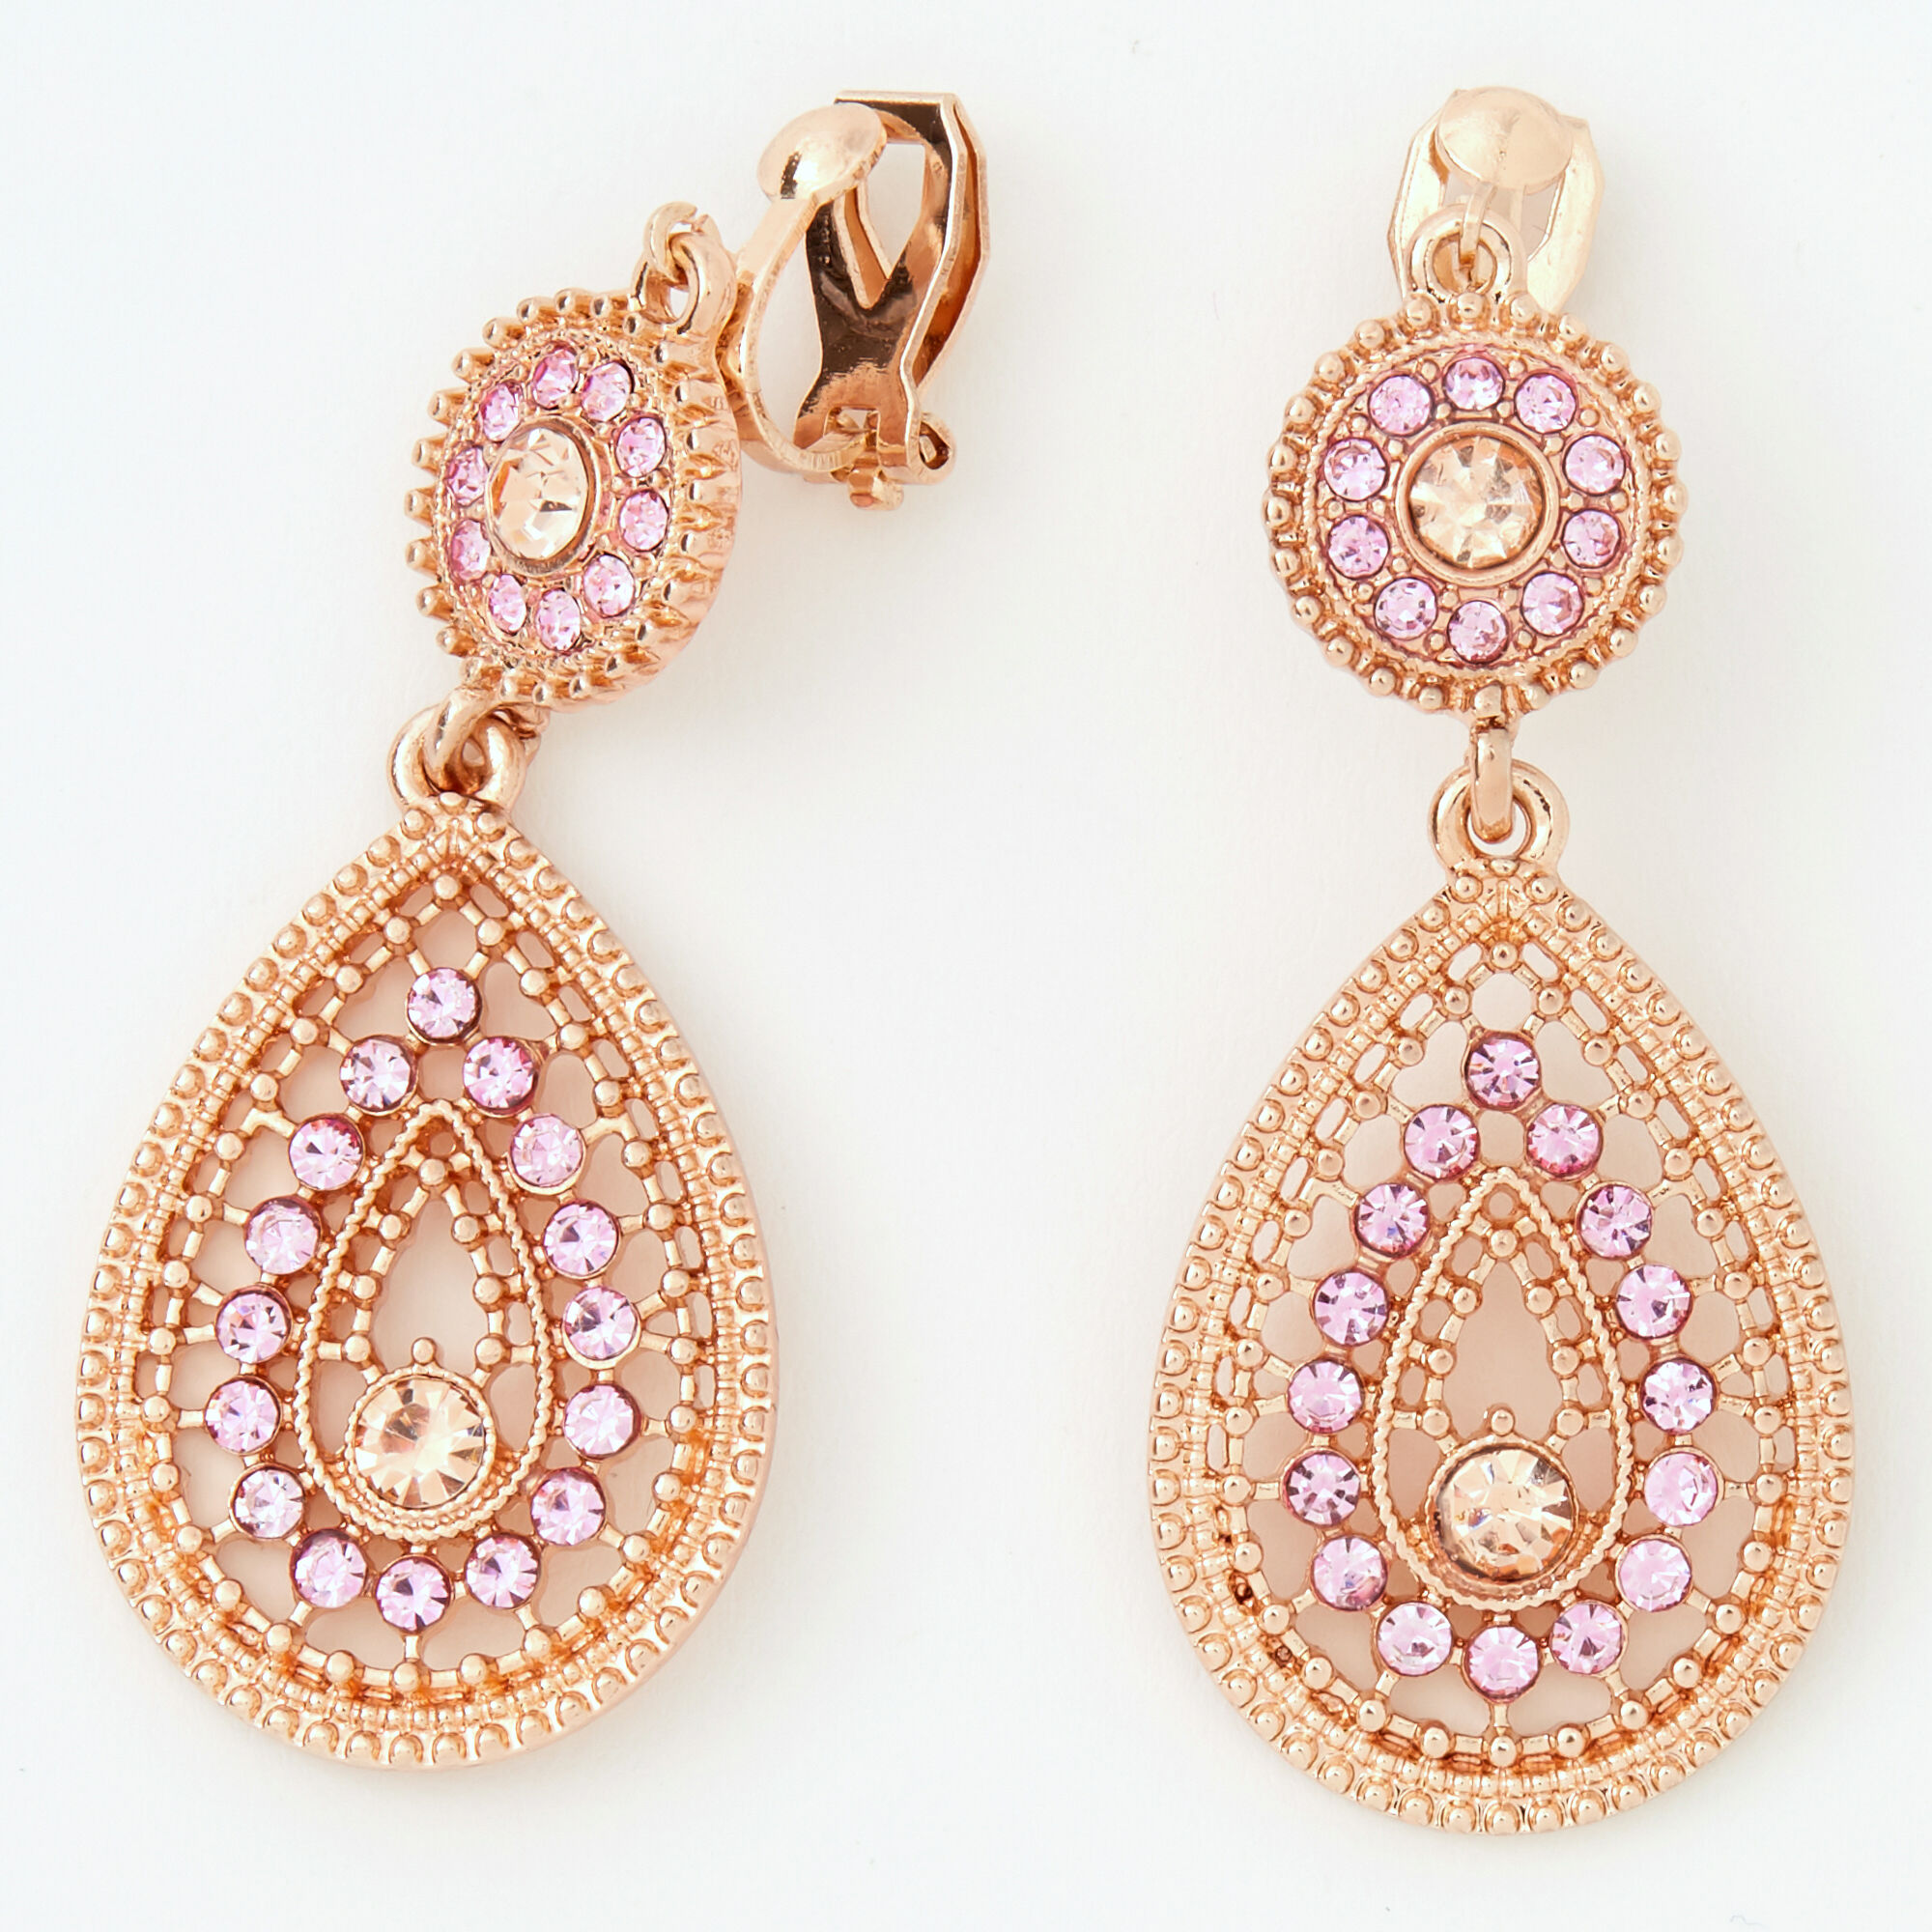 Details more than 155 pink earrings for gown super hot - camera.edu.vn